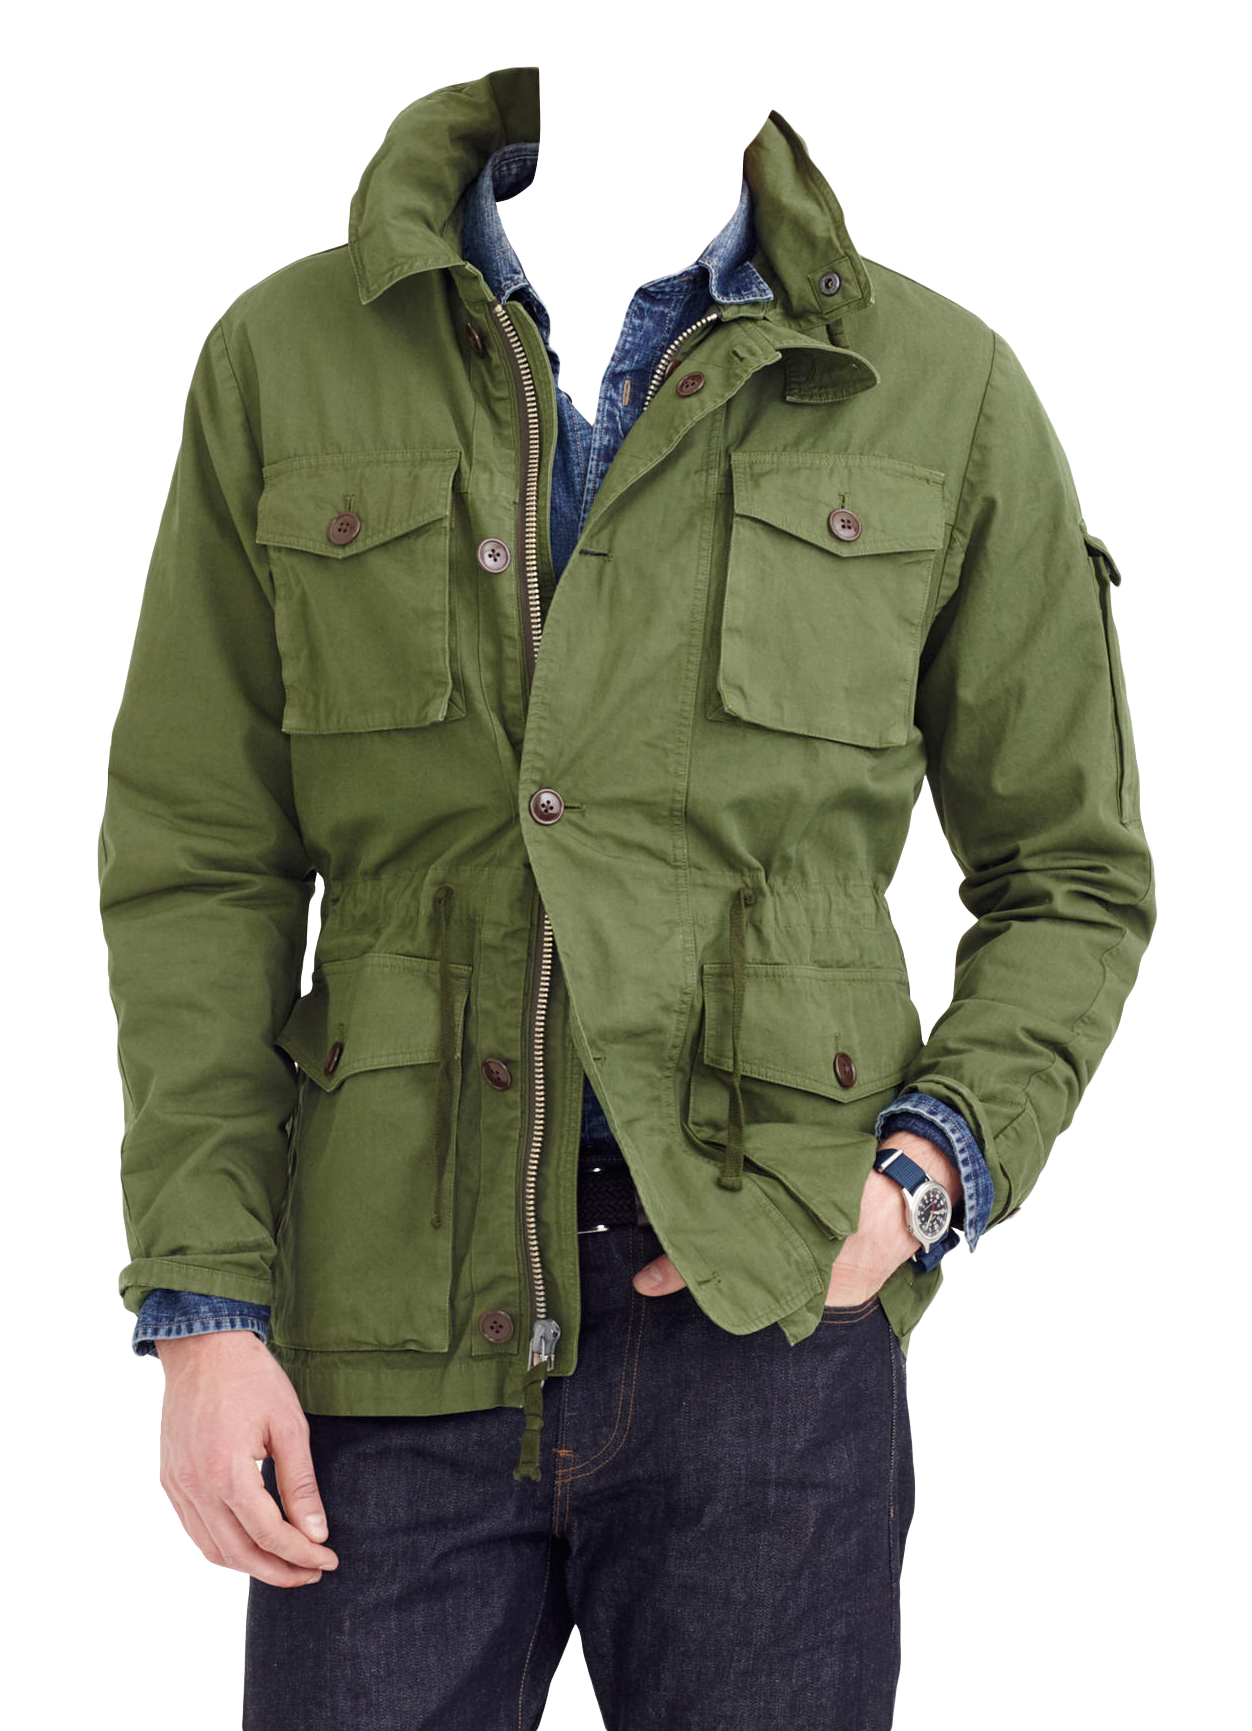 Outerwear Free PNG Image